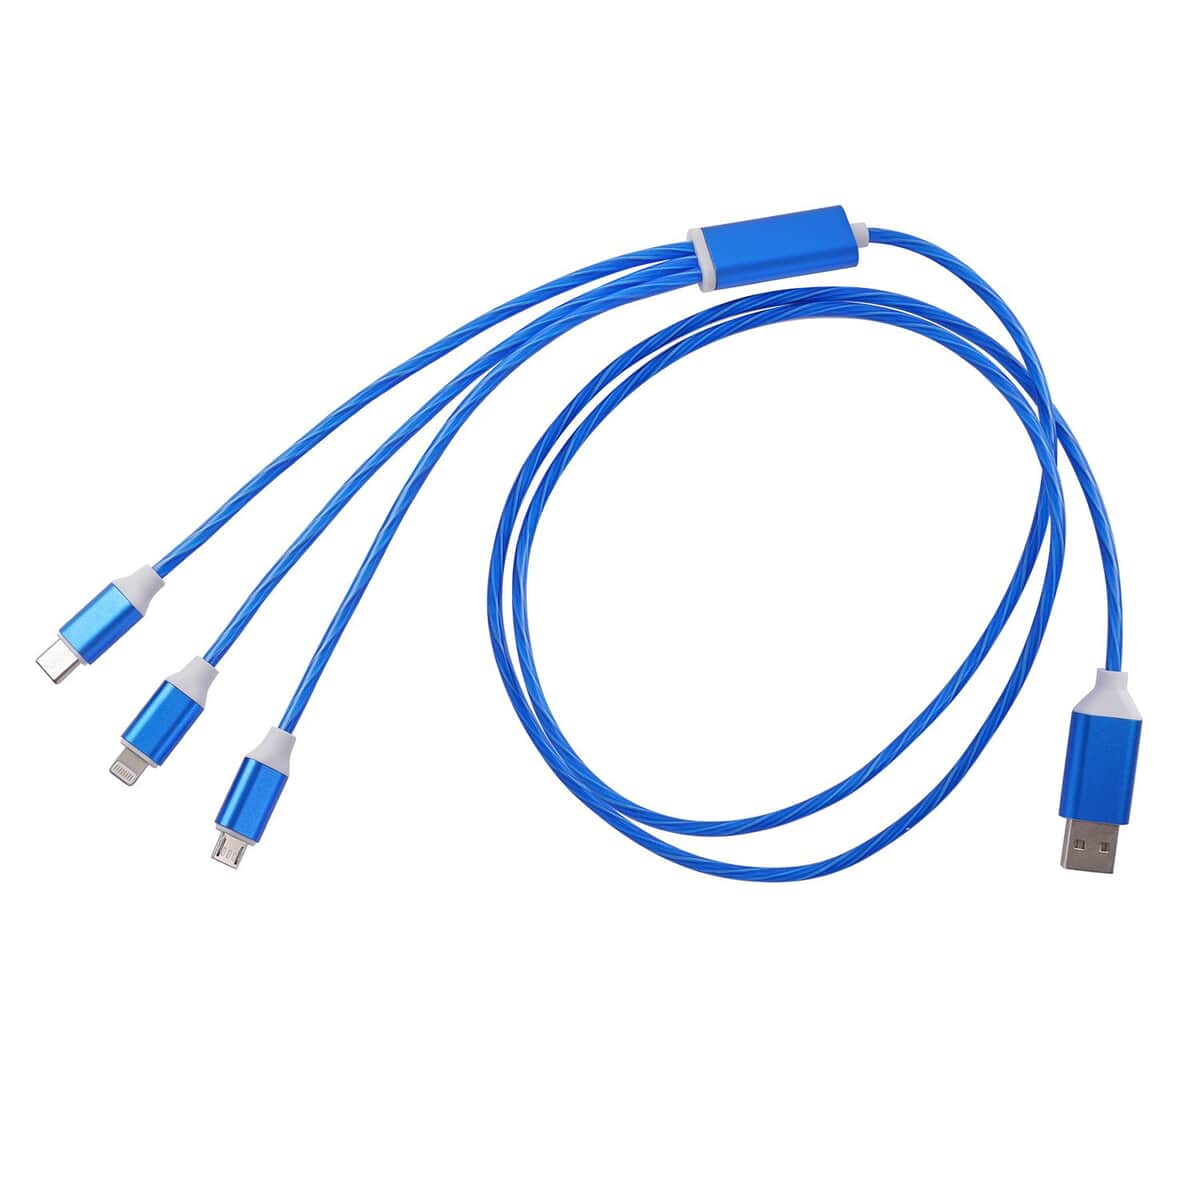 2pcs Set 3 in 1 Light Moving Charging Cable - Blue (47.24") image number 0